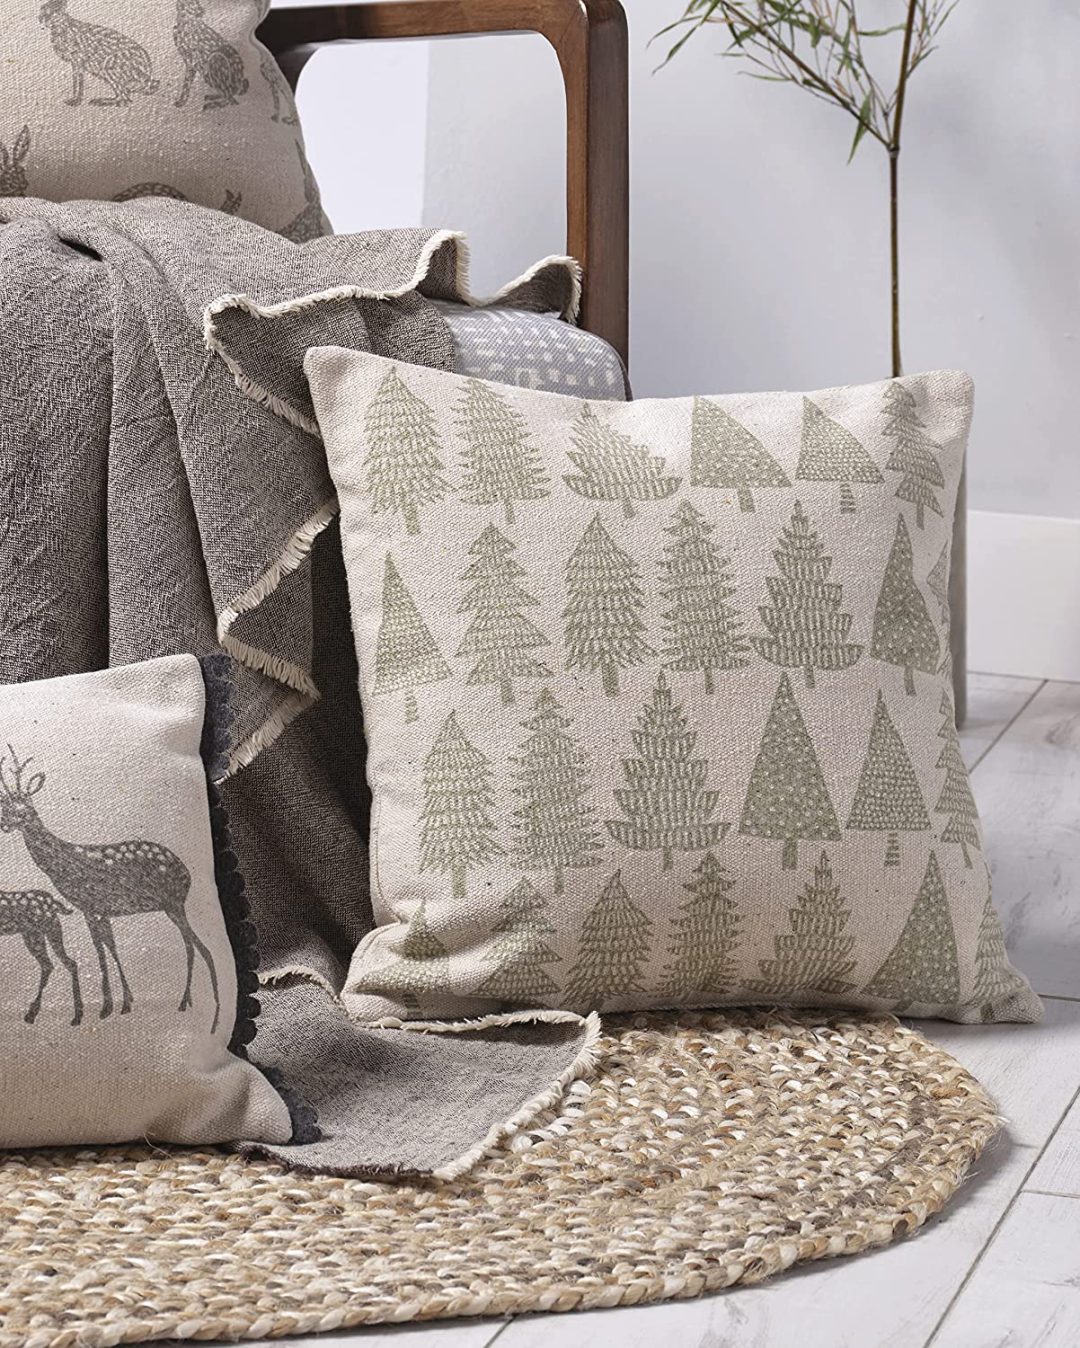 Forest Tree Filled Cushion Natural & Spruce Green 43cm x 43cm by Walton & Co